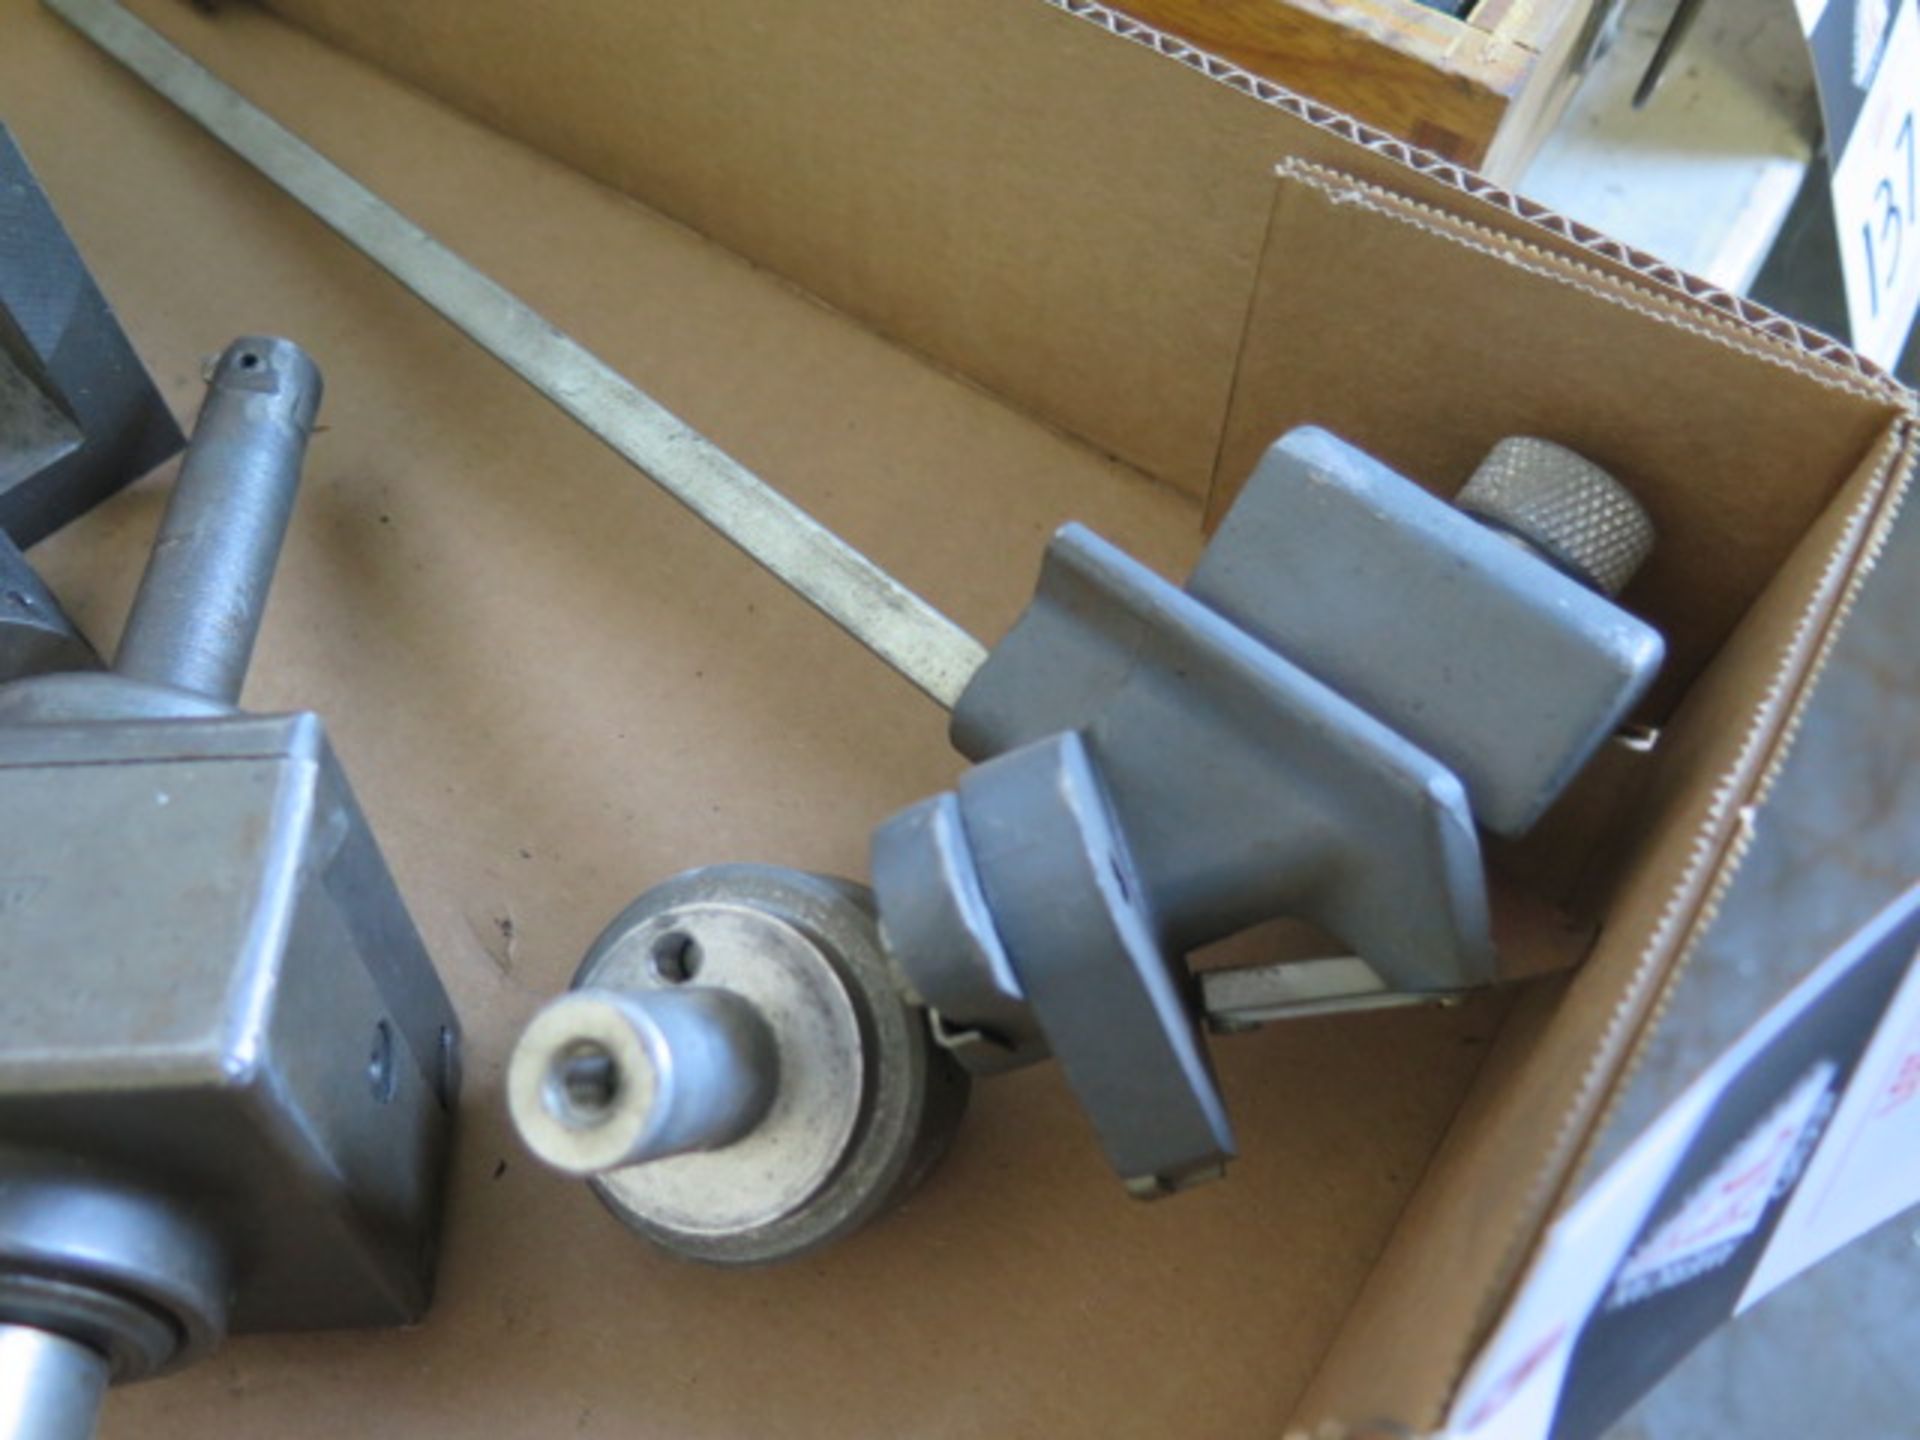 Criterion Boring Head, Angle Plates, 1 1/2" Machine Vise and Drill Sharpening Attachment (SOLD AS-IS - Image 5 of 5